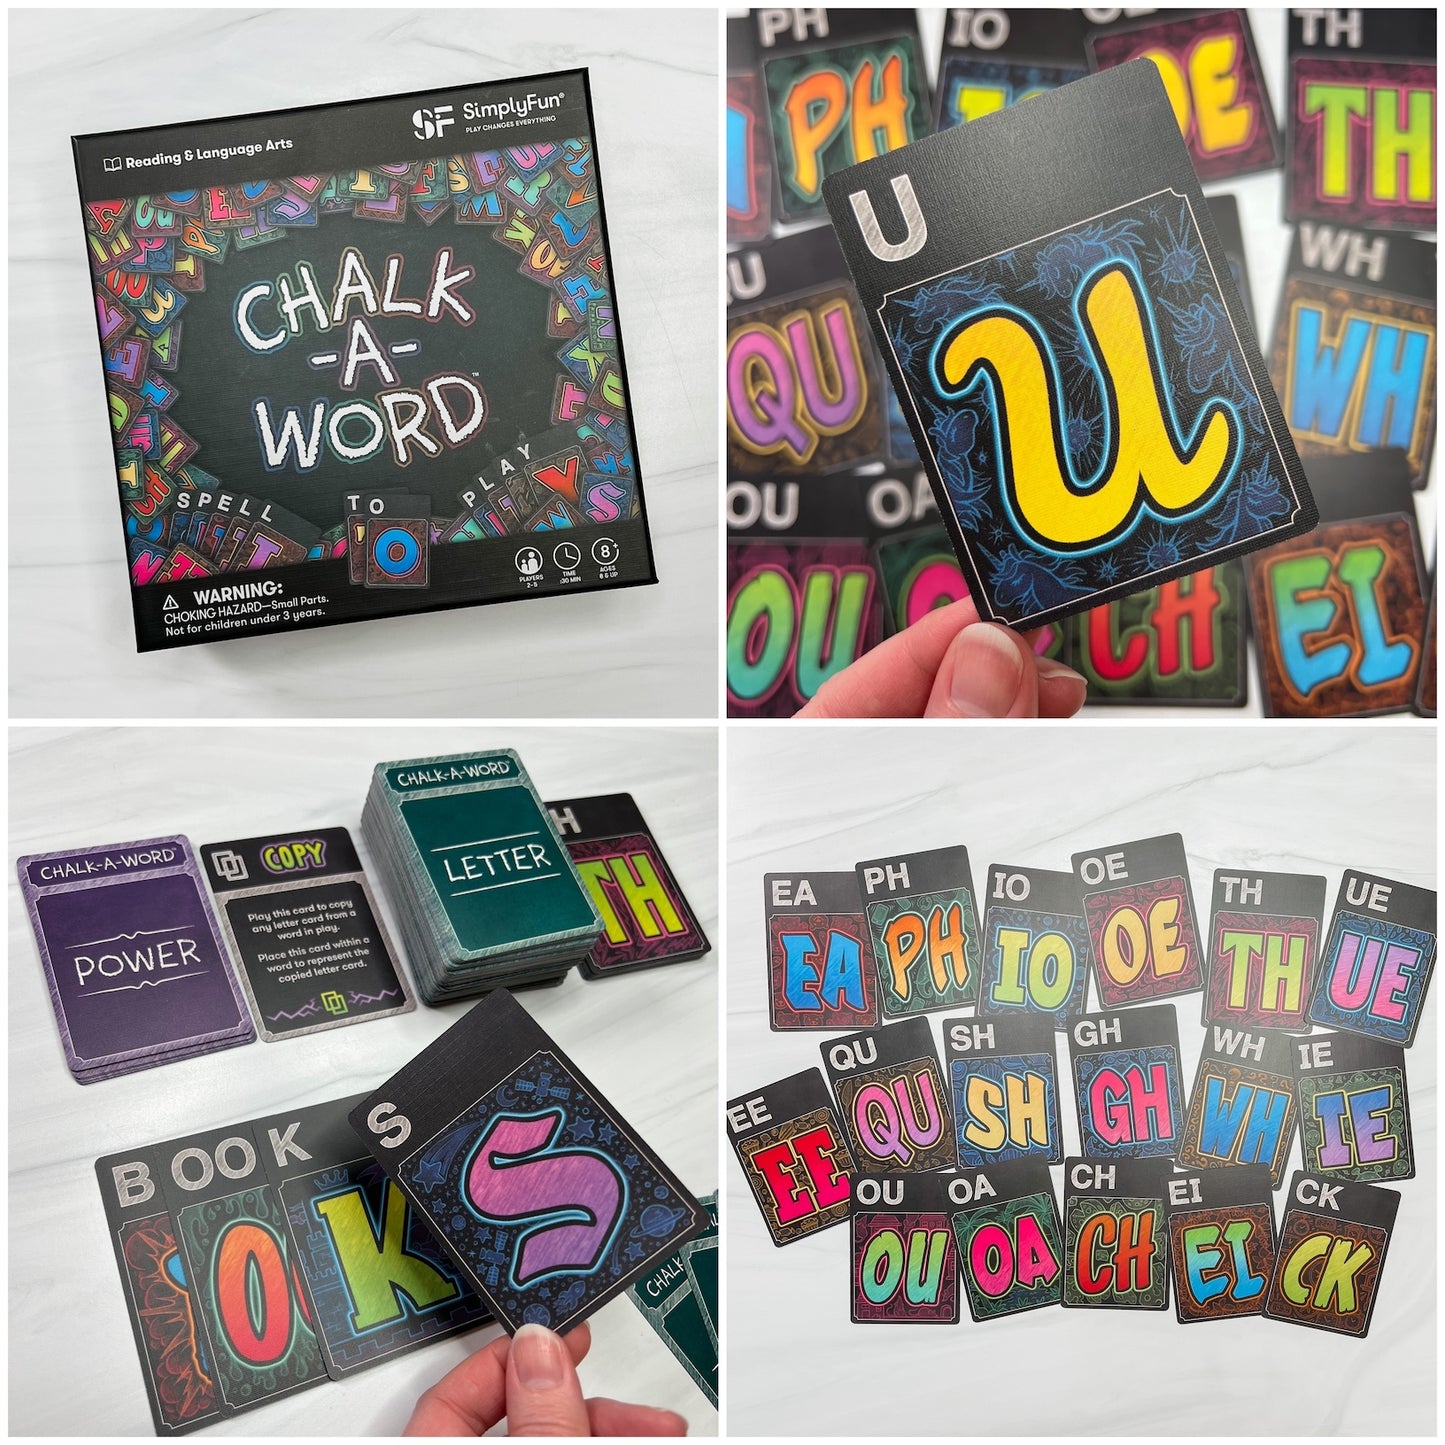 Tabletop gaming word game Chalk-A-Word